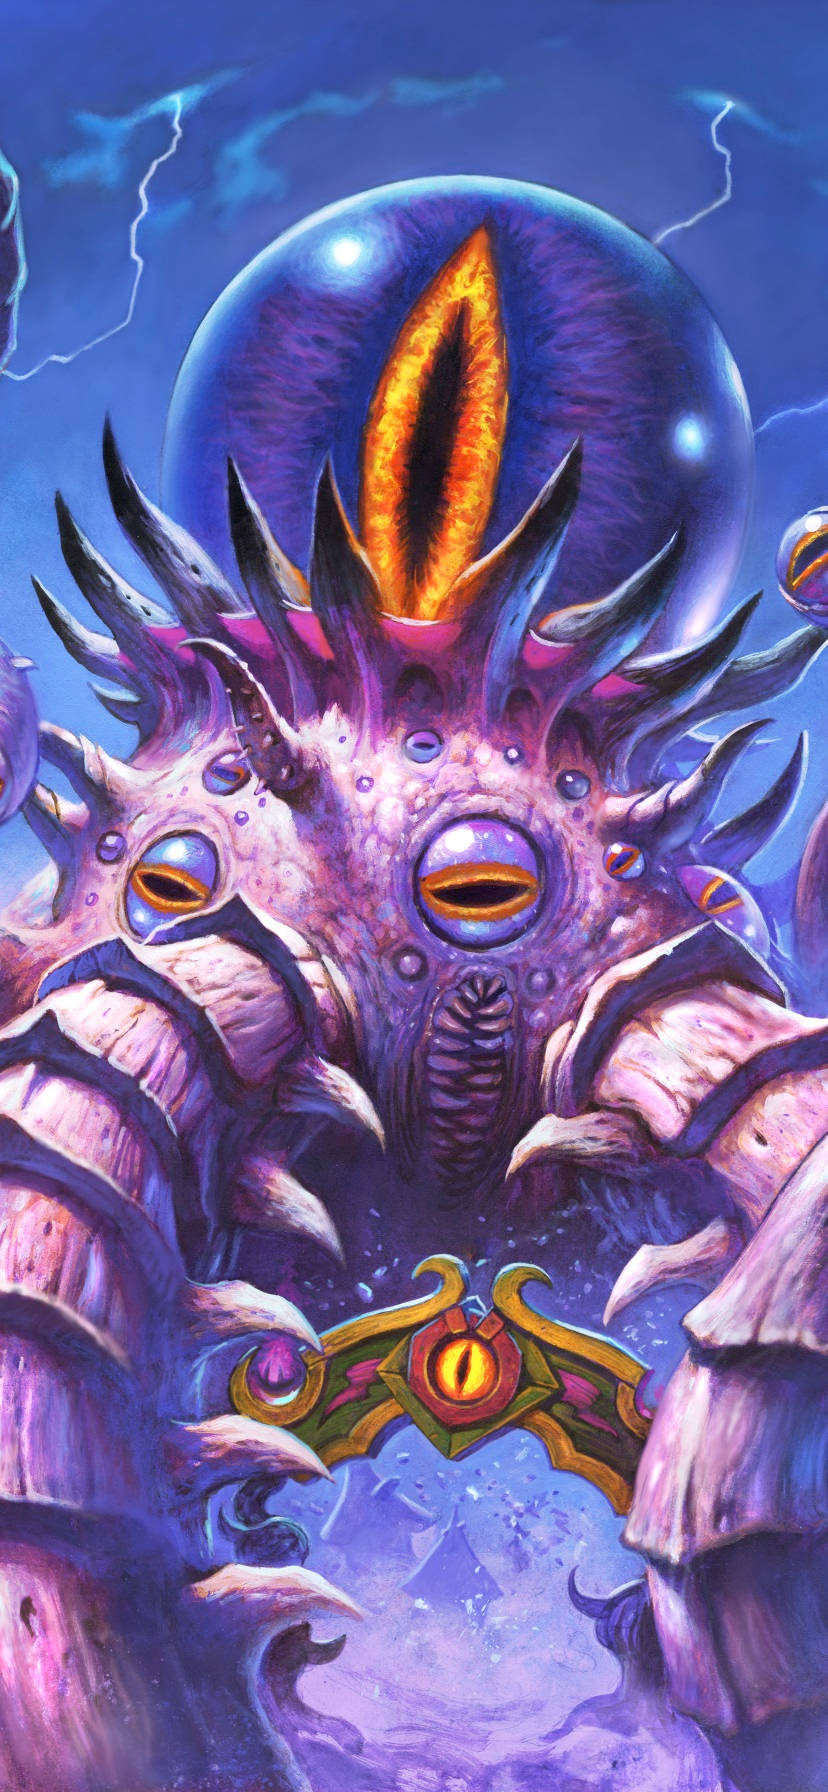 Hearthstone Phone C'thun The Shattered Background